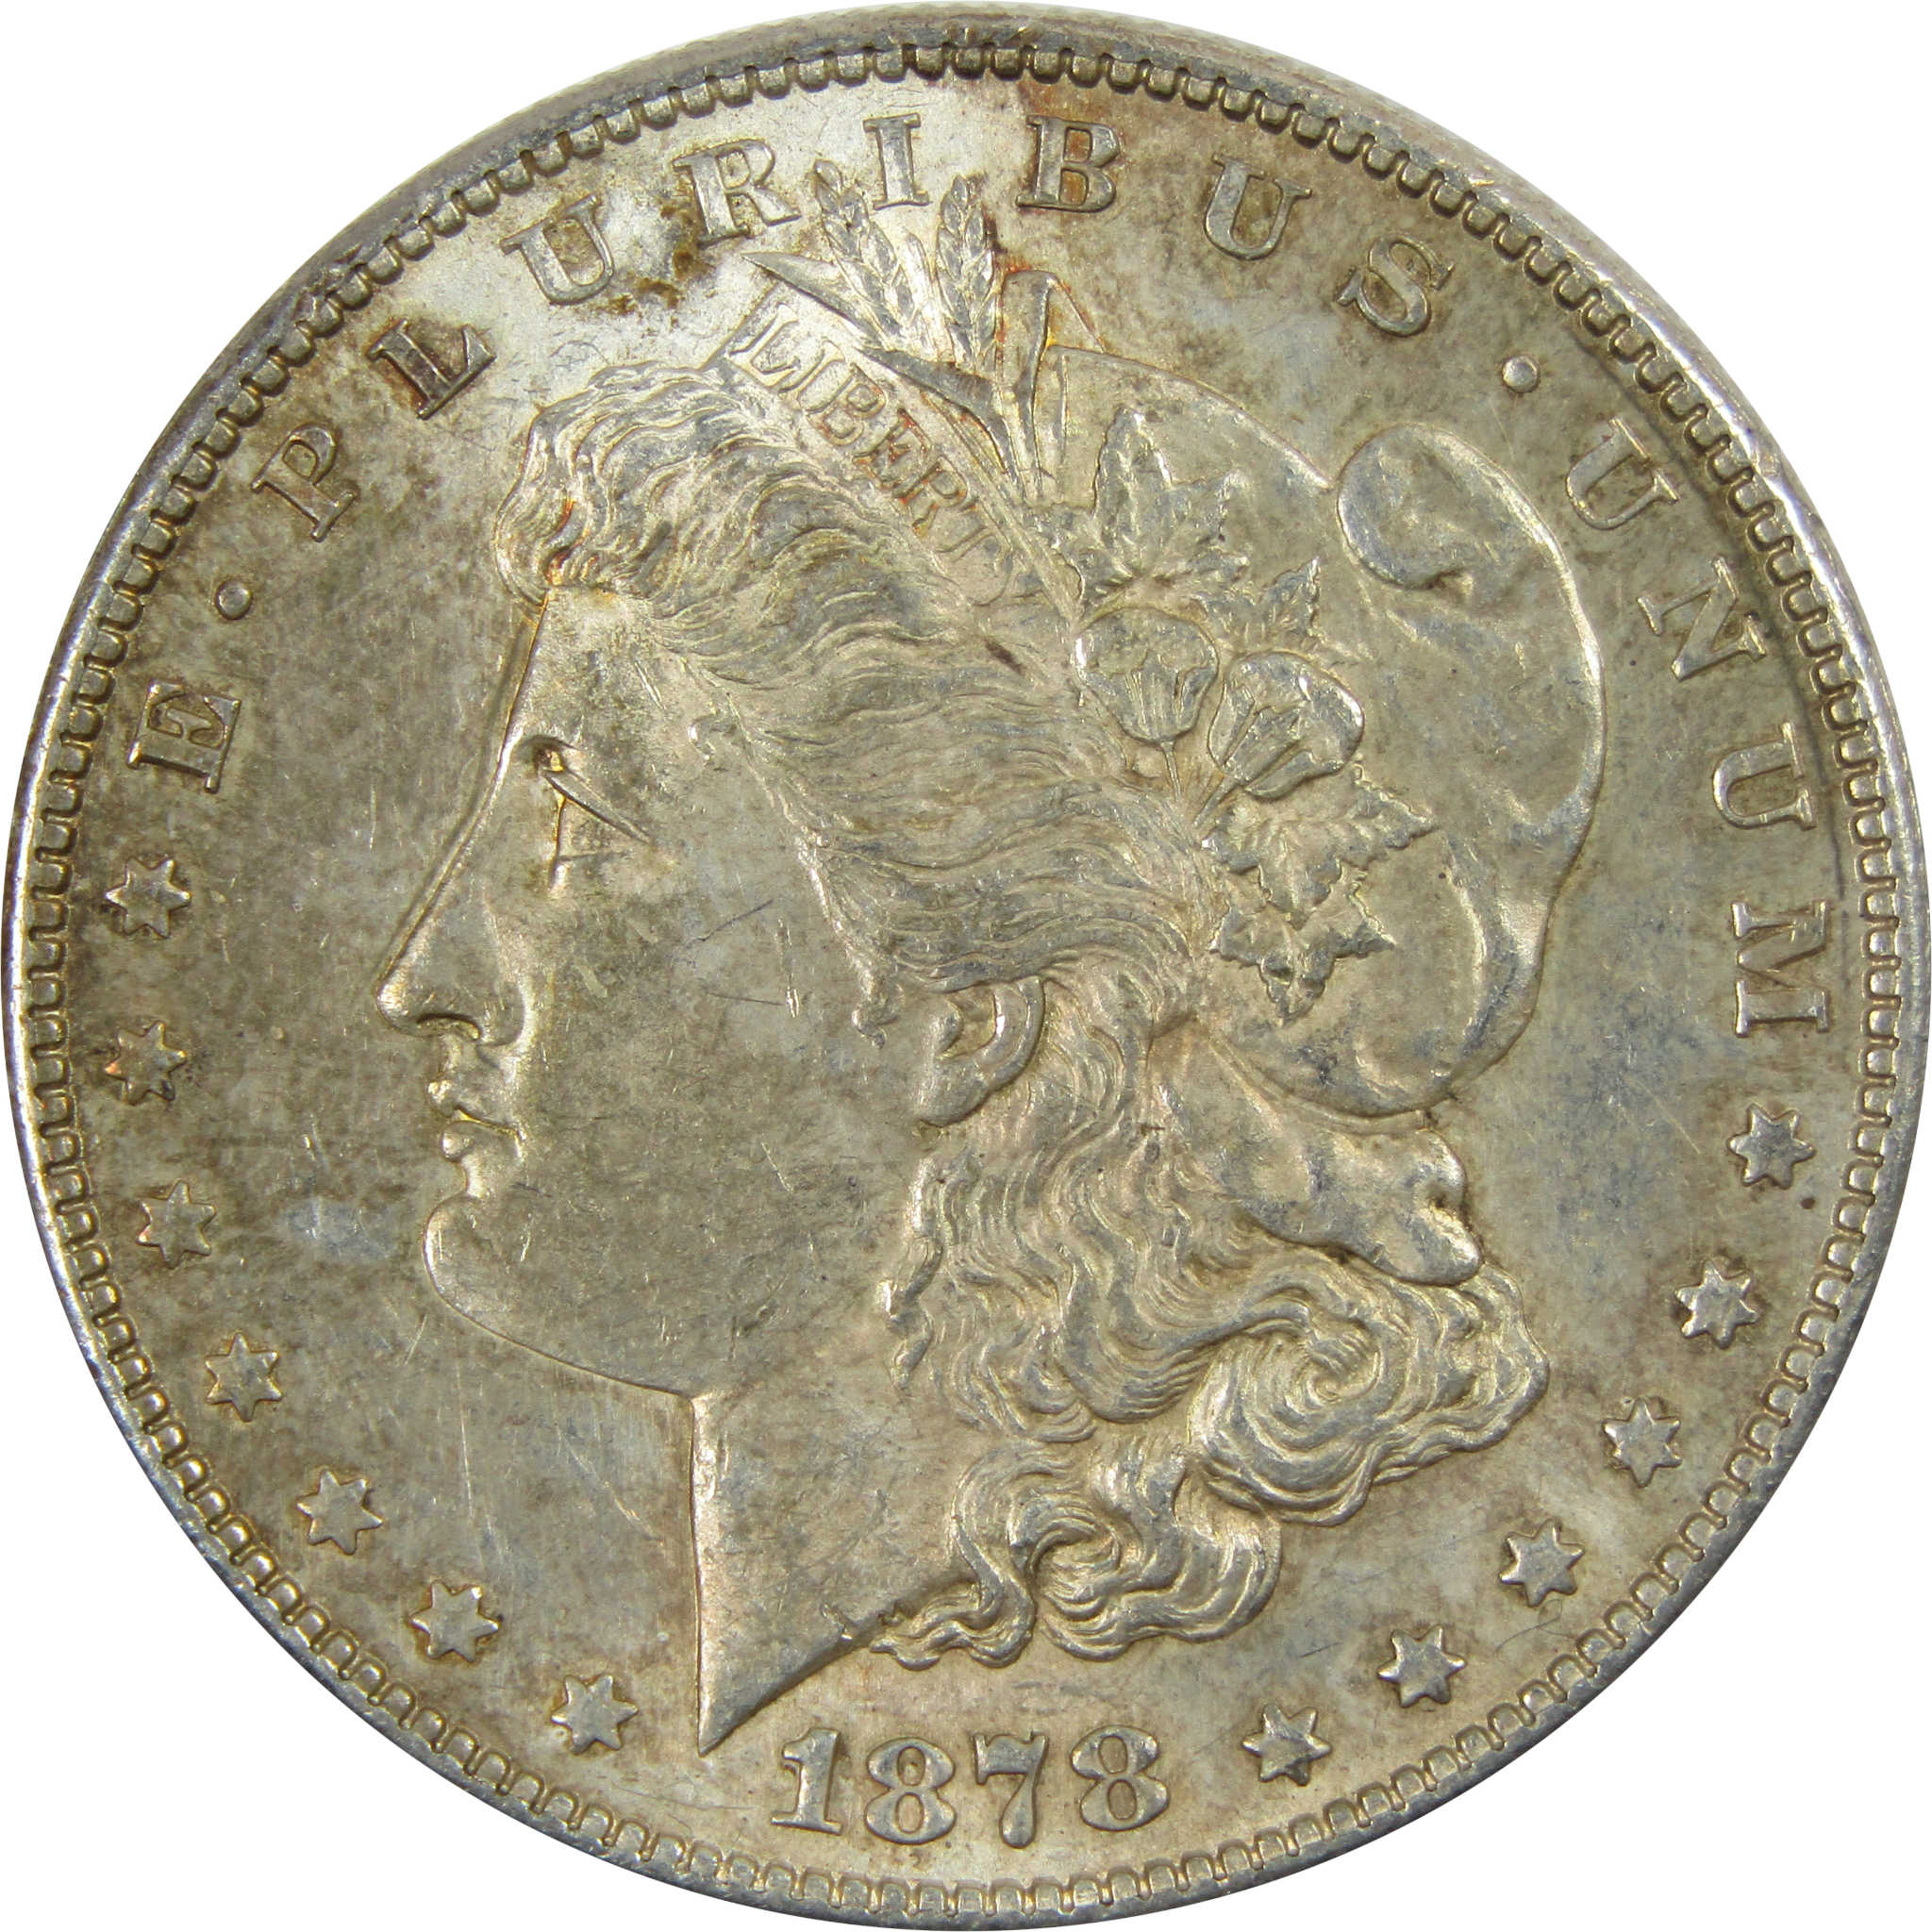 1878 S Morgan Dollar XF EF Extremely Fine 90% Silver $1 Coin SKU:I7003 - Morgan coin - Morgan silver dollar - Morgan silver dollar for sale - Profile Coins &amp; Collectibles